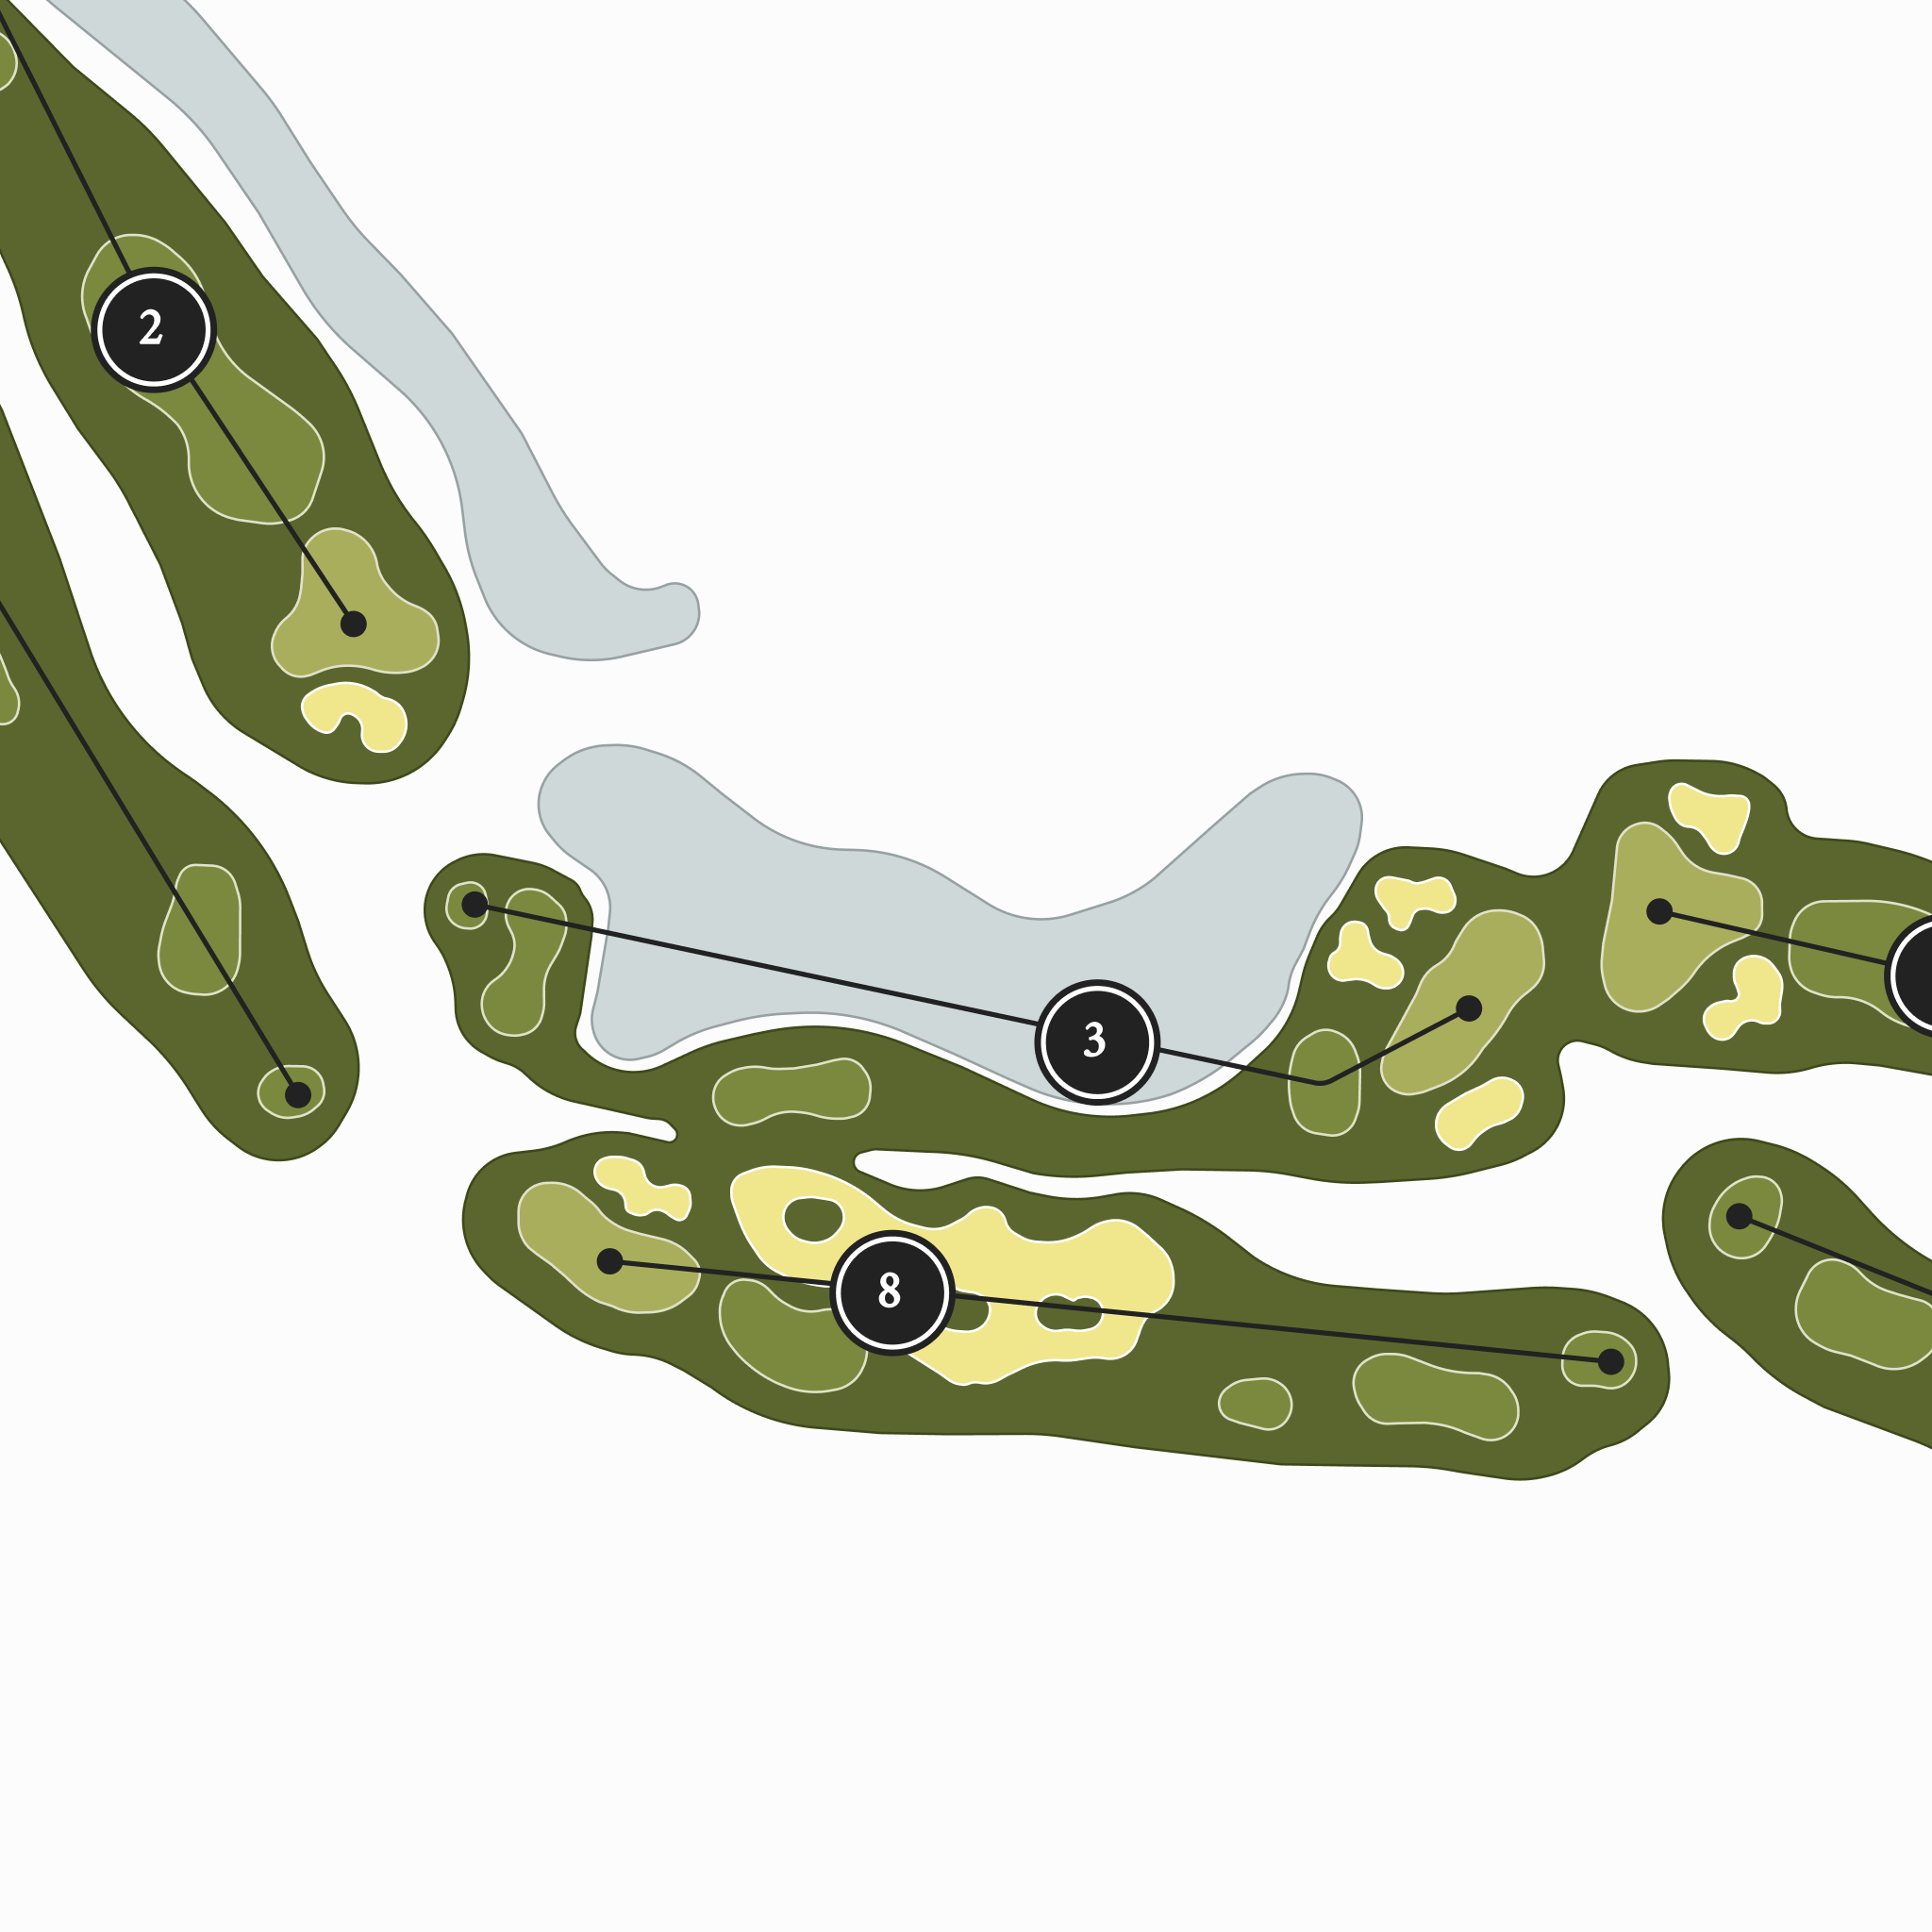 Spring Creek Golf Center | Heritage Style Golf Course Print | Close Up With Hole Numbers #hole numbers_yes